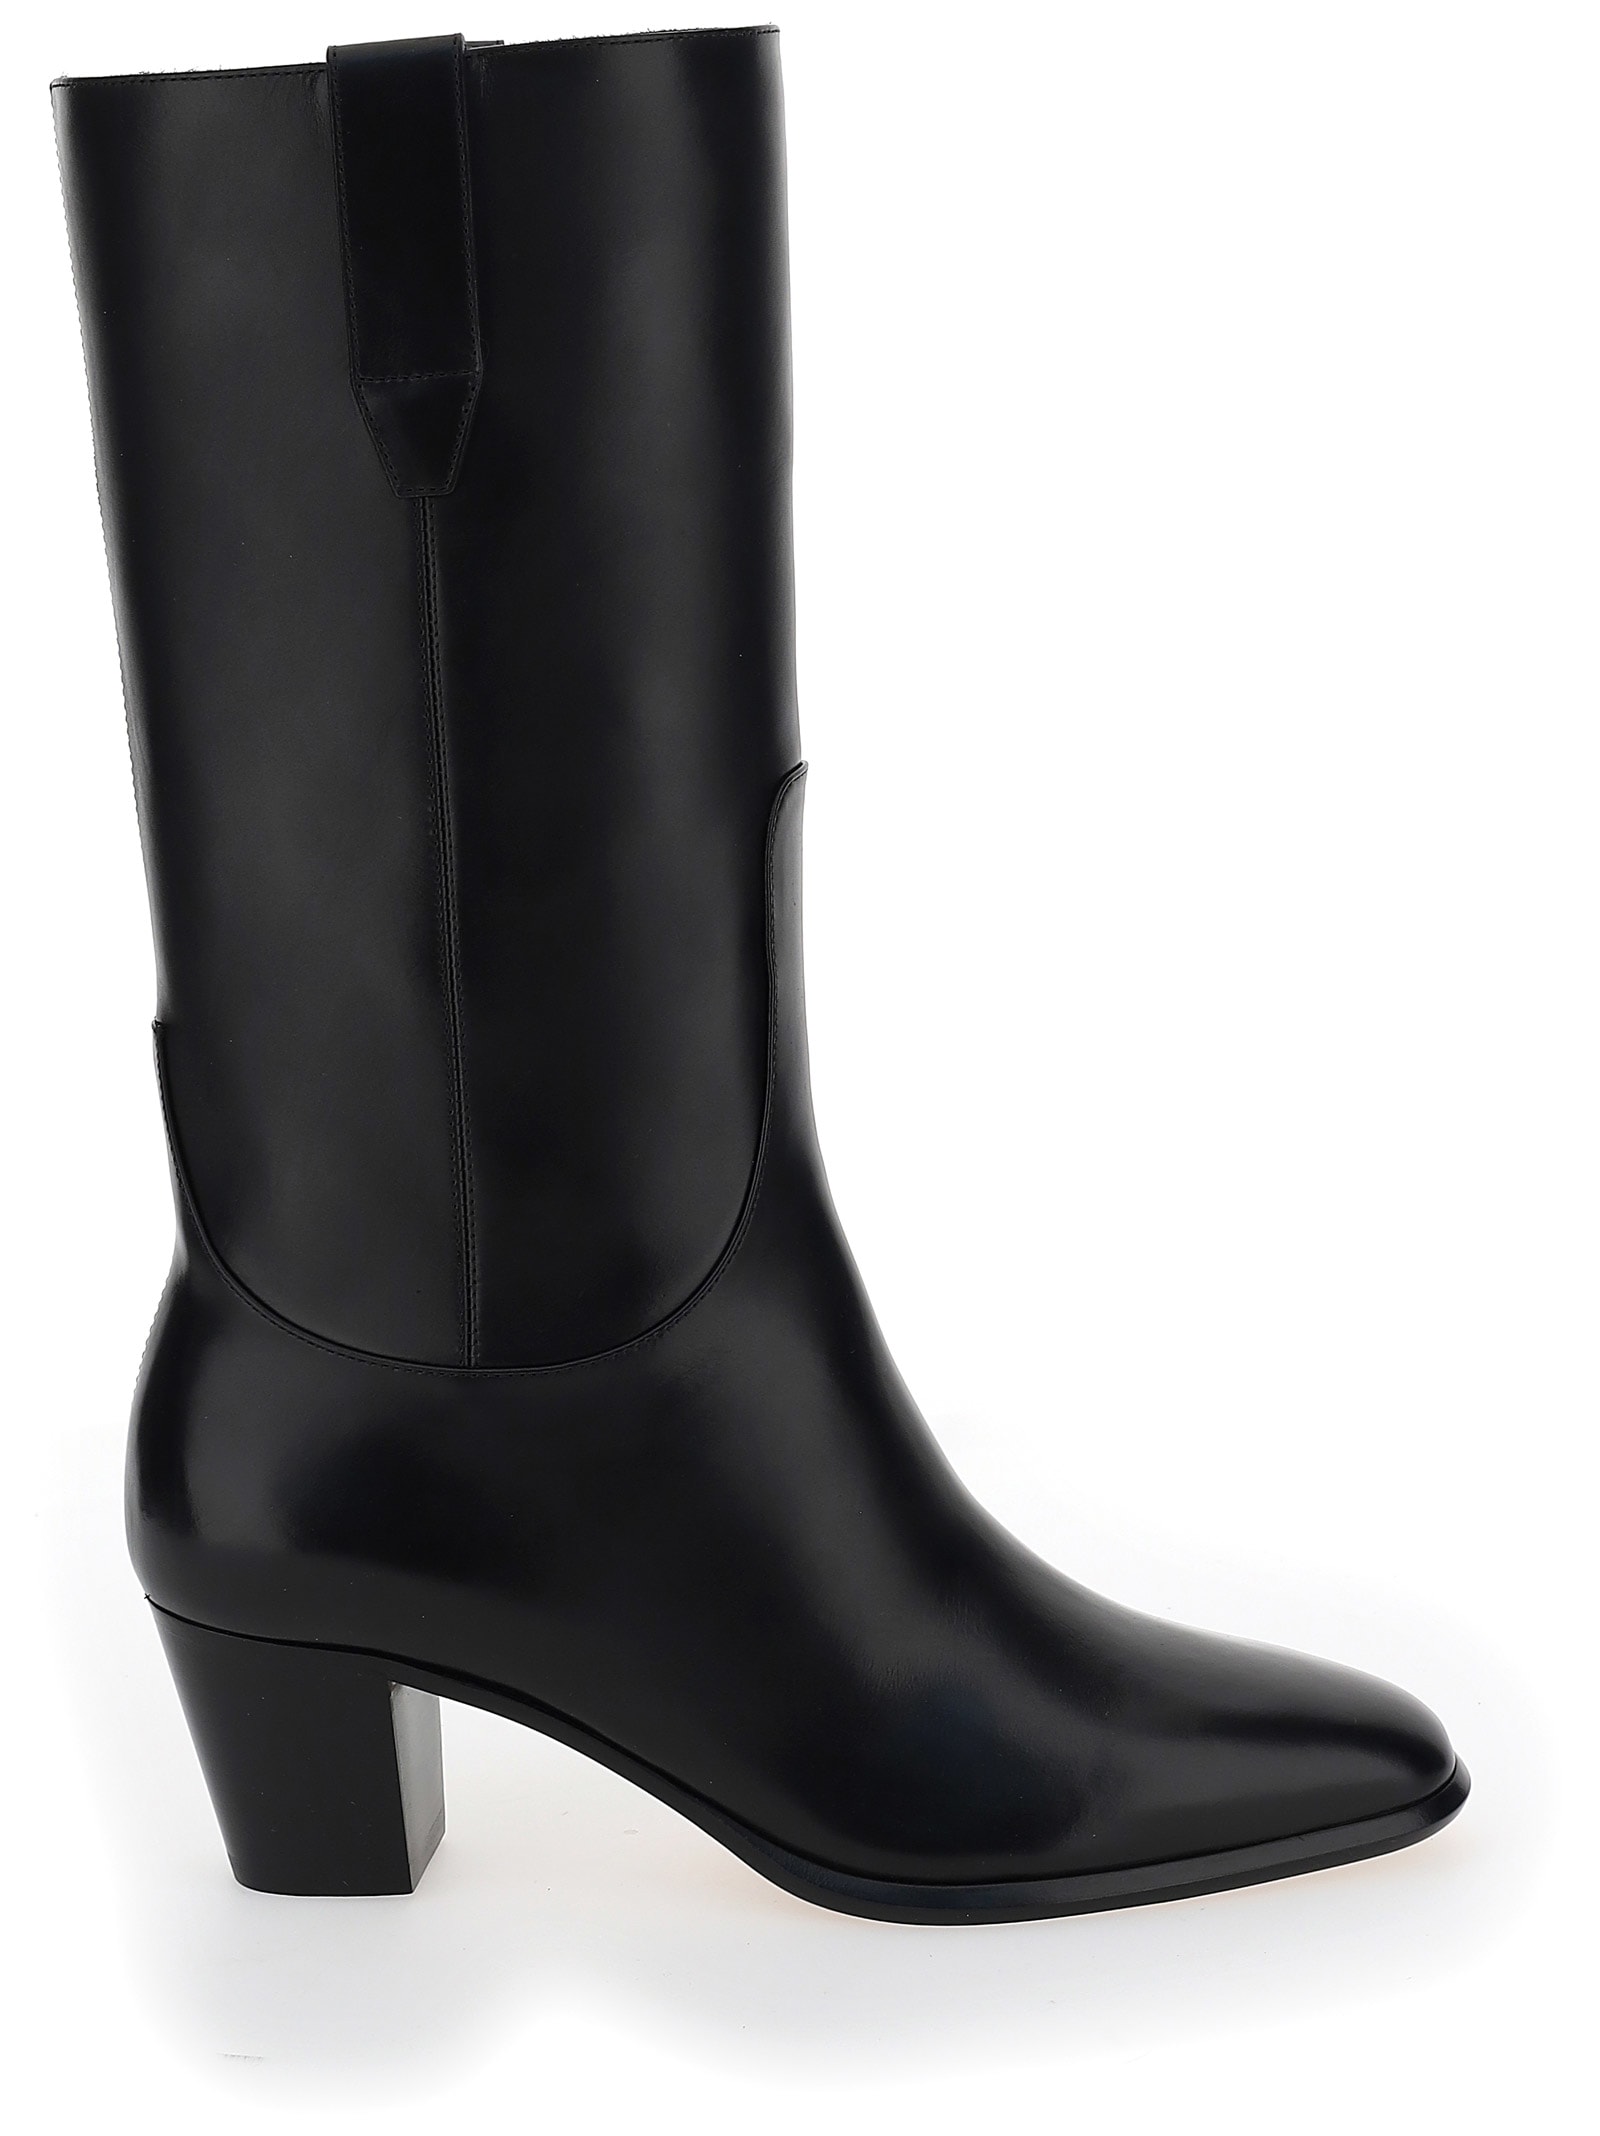 Buy Francesco Russo Boots online, shop Francesco Russo shoes with free shipping